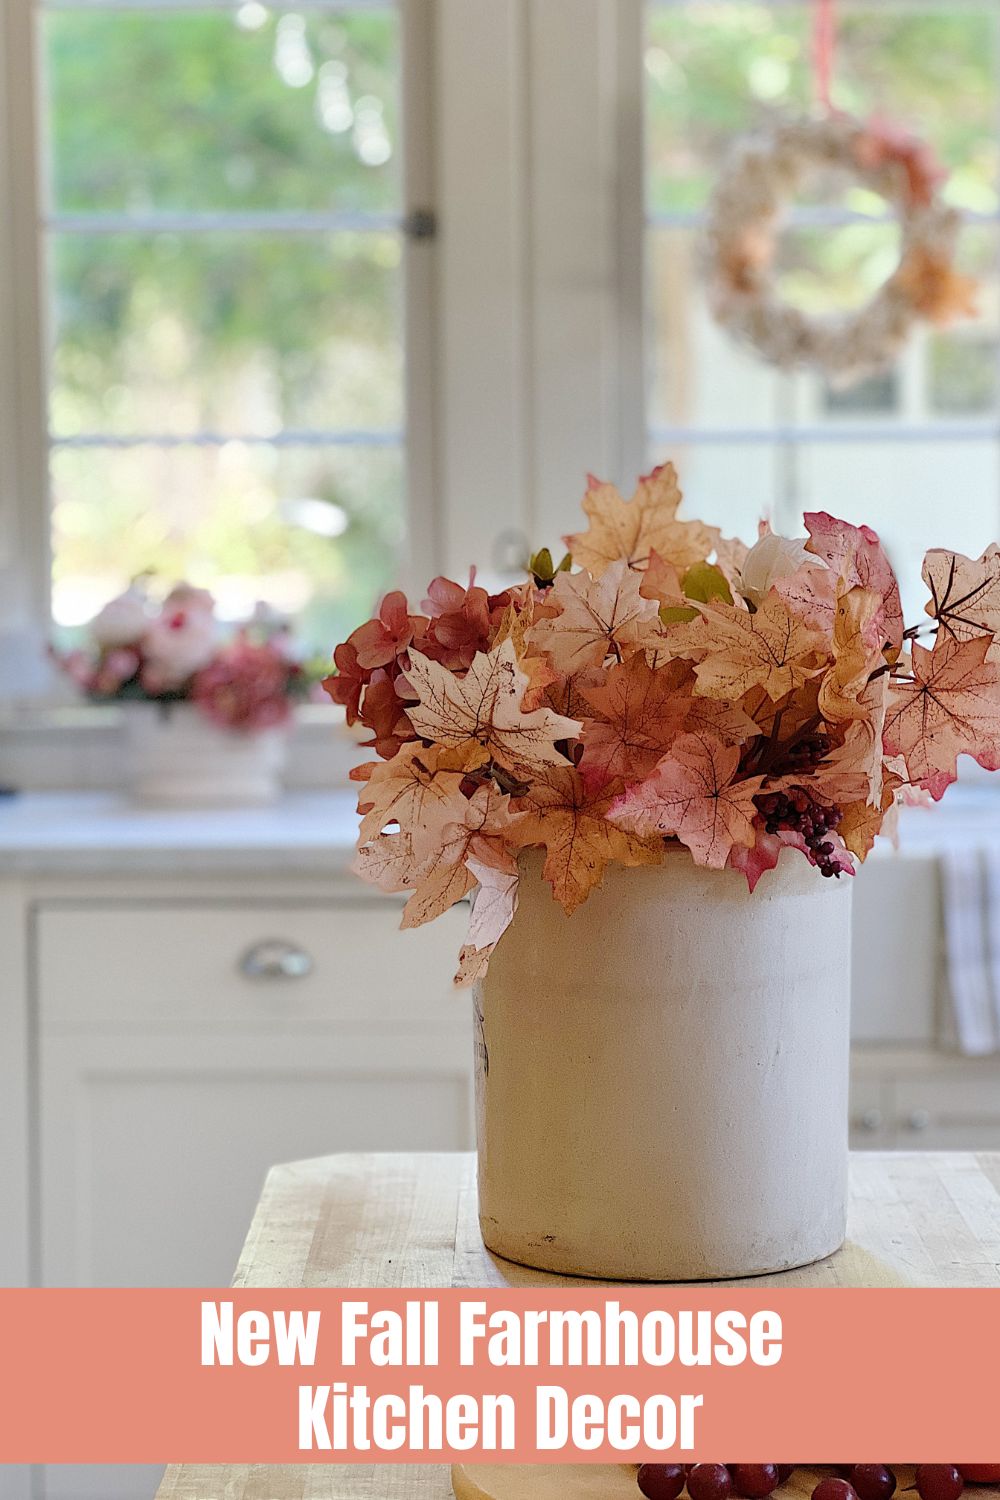 I love adding new fall farmhouse kitchen decor to our home. It makes me smile to see how the fall branches add so much color to our kitchen.